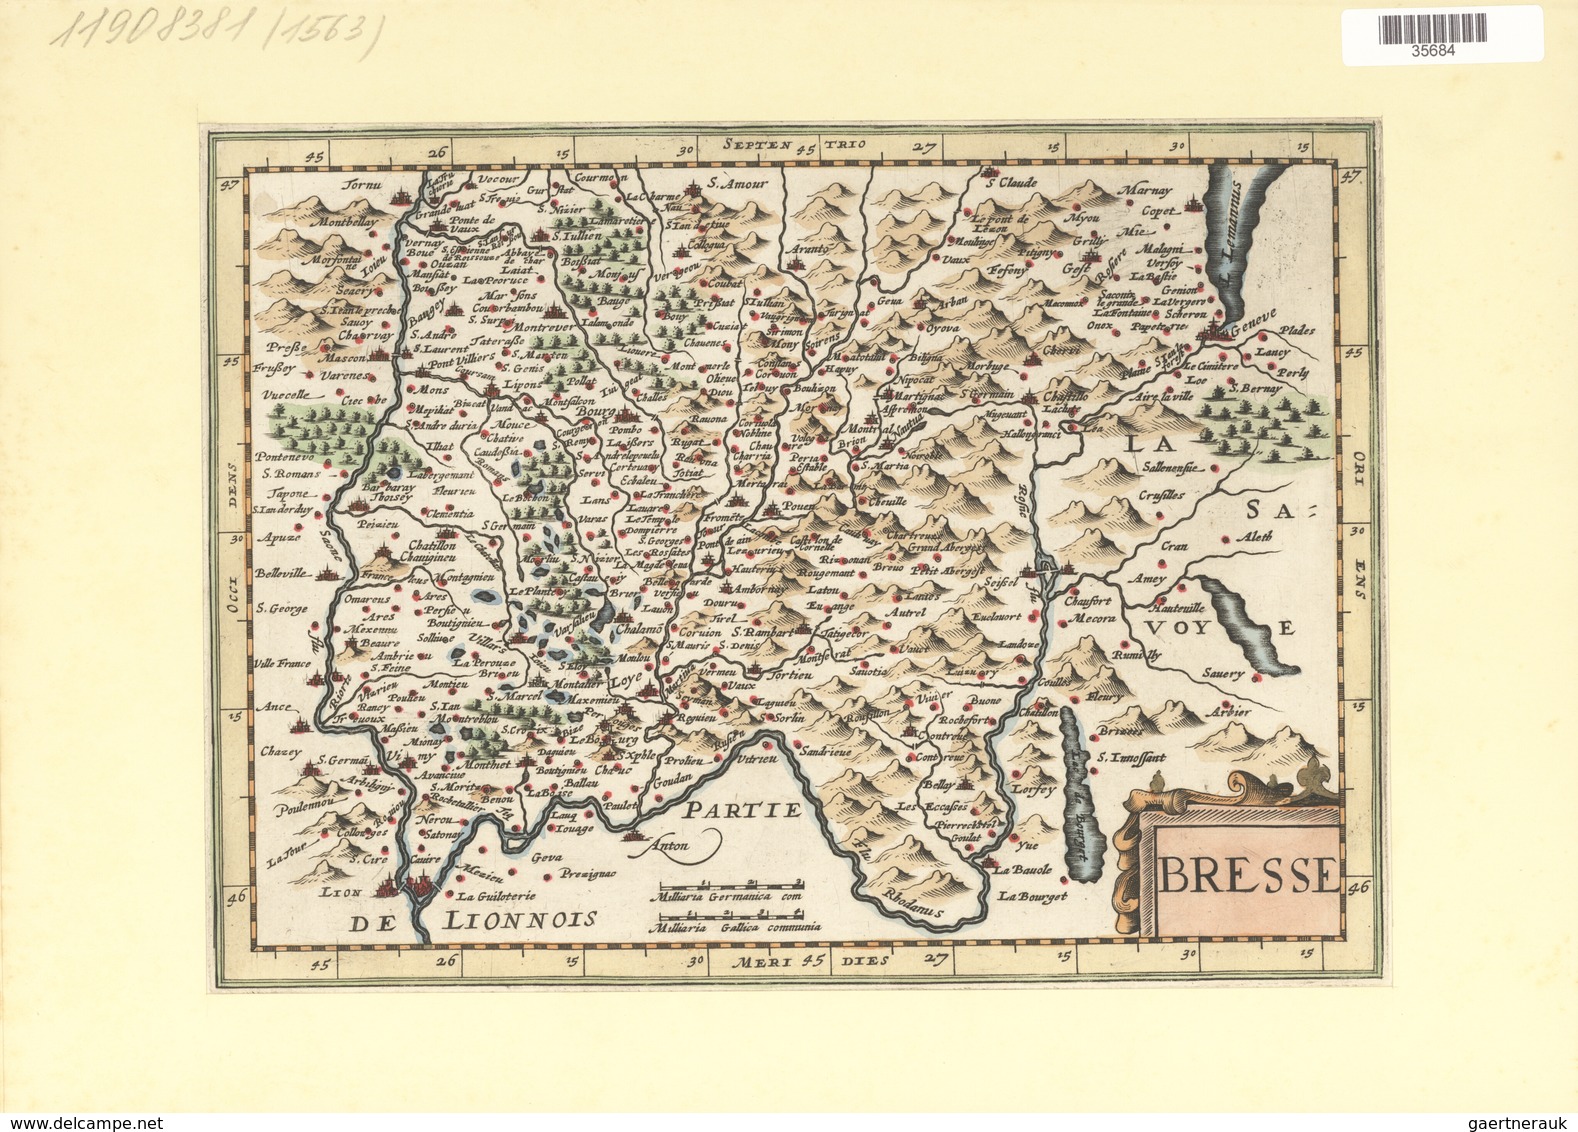 Landkarten Und Stiche: 1734. Map Of Bresse Region Of France Up To Lac Lemans In Switzerland. From Th - Geography